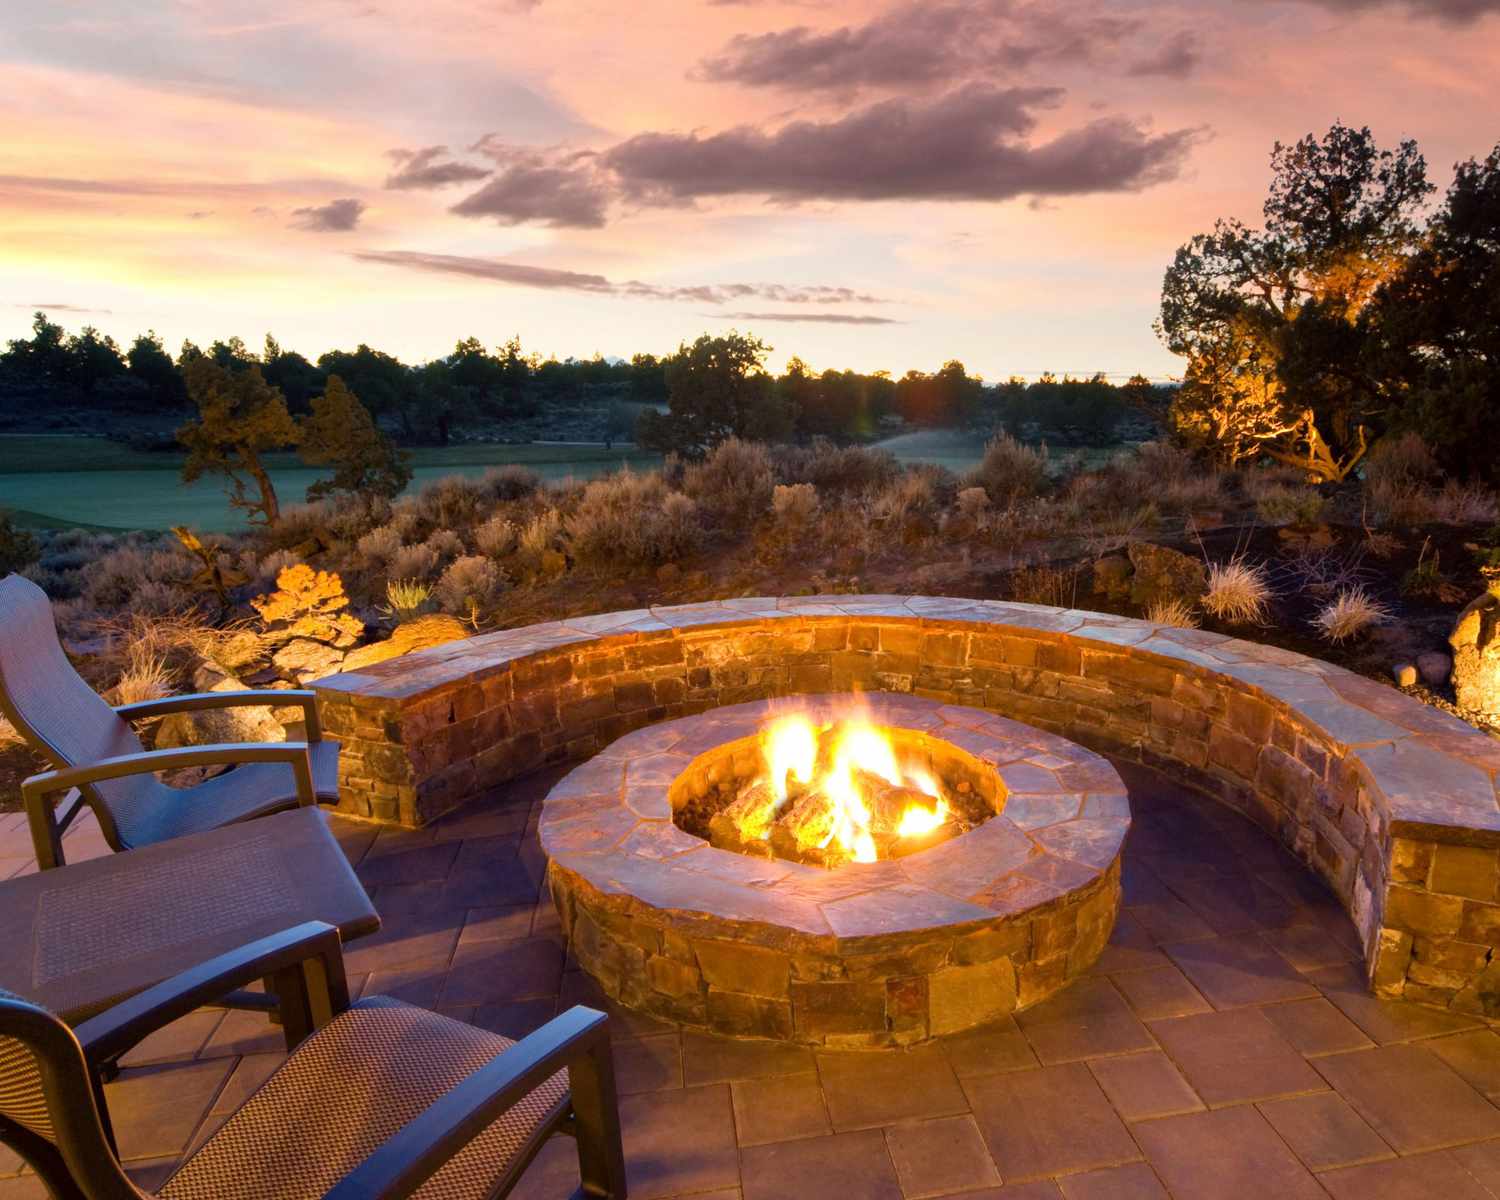 Diy Fire Pit Martha Stewart, Outdoor Fire Pits Build Your Own